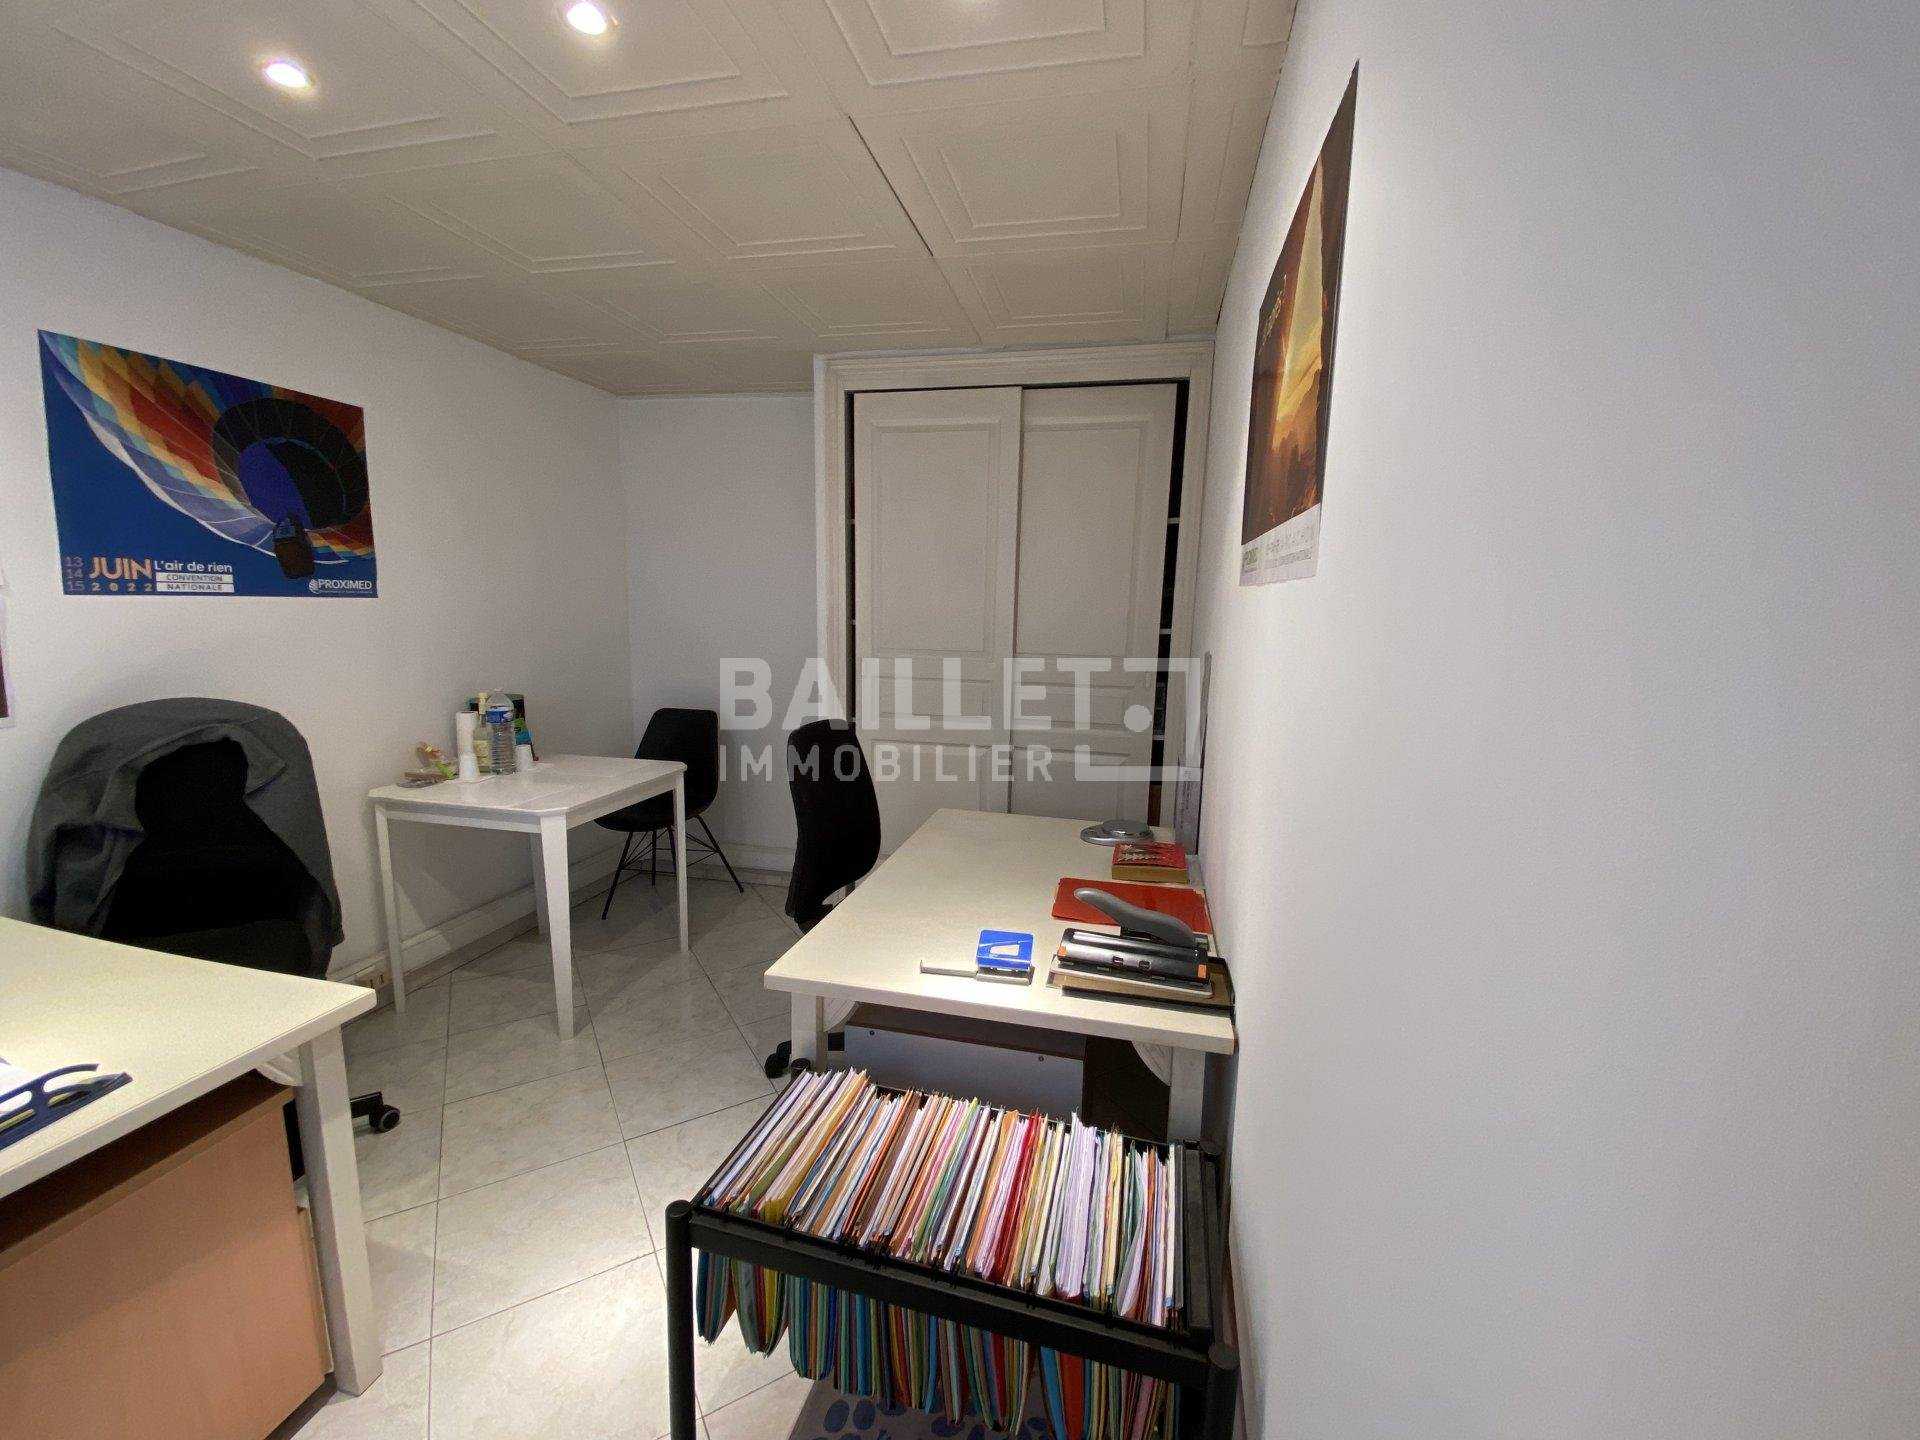 Retail in Antibes, Alpes-Maritimes 11503069